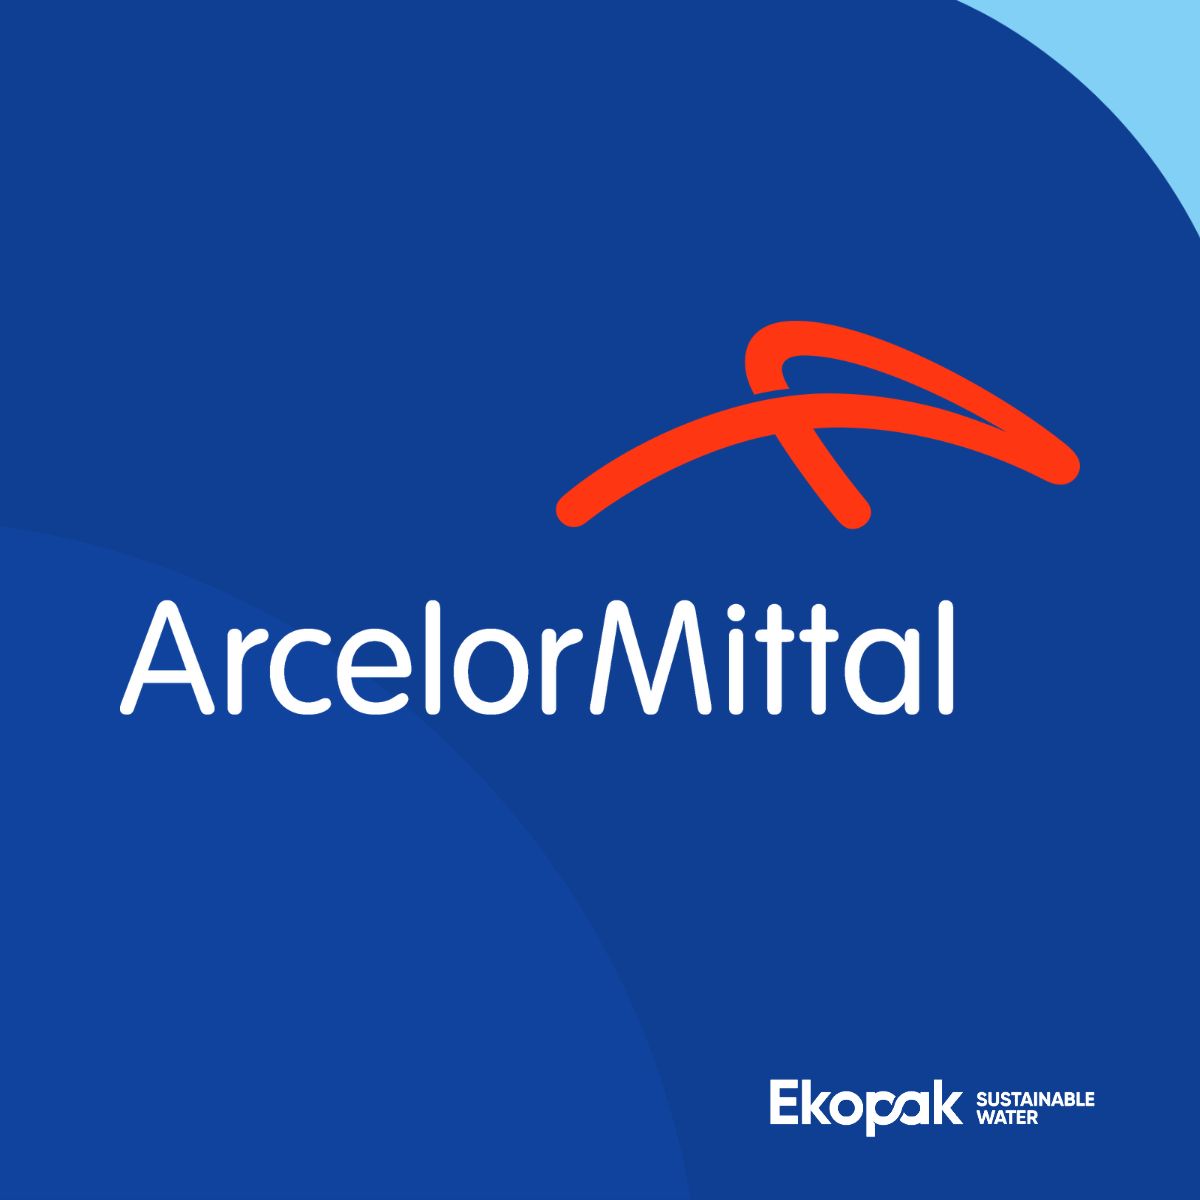 Ekopak will supply ArcelorMittal Ghent with process water